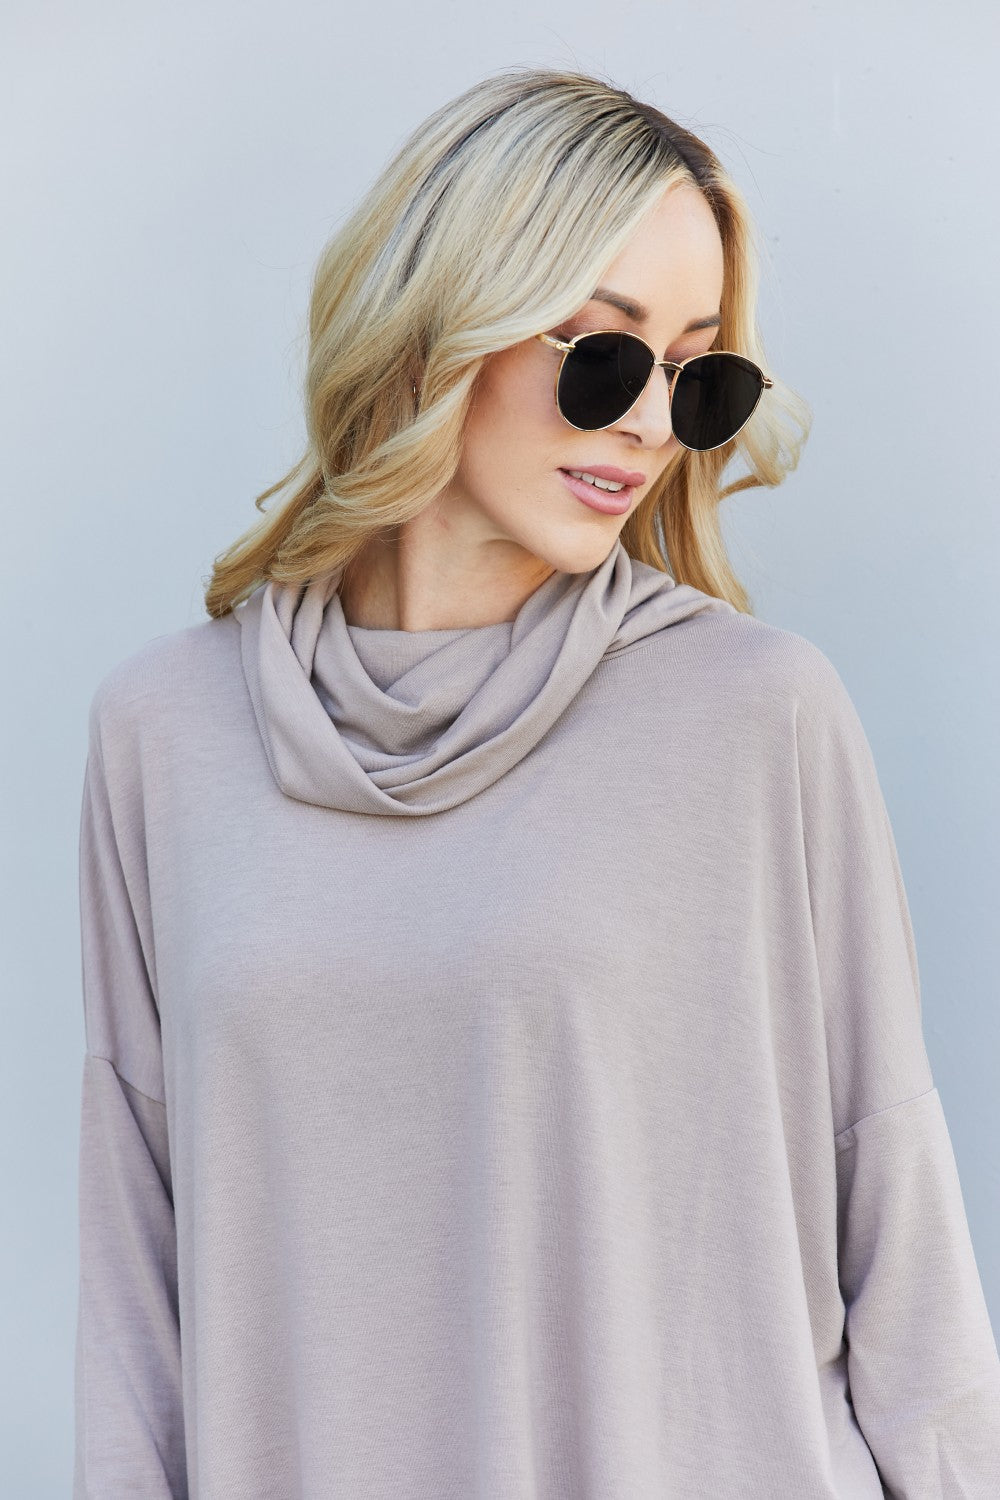 Cowl Neck Tunic in Ash Mocha-tunic-Trendsi-Styled by Steph-Women's Fashion Clothing Boutique, Indiana